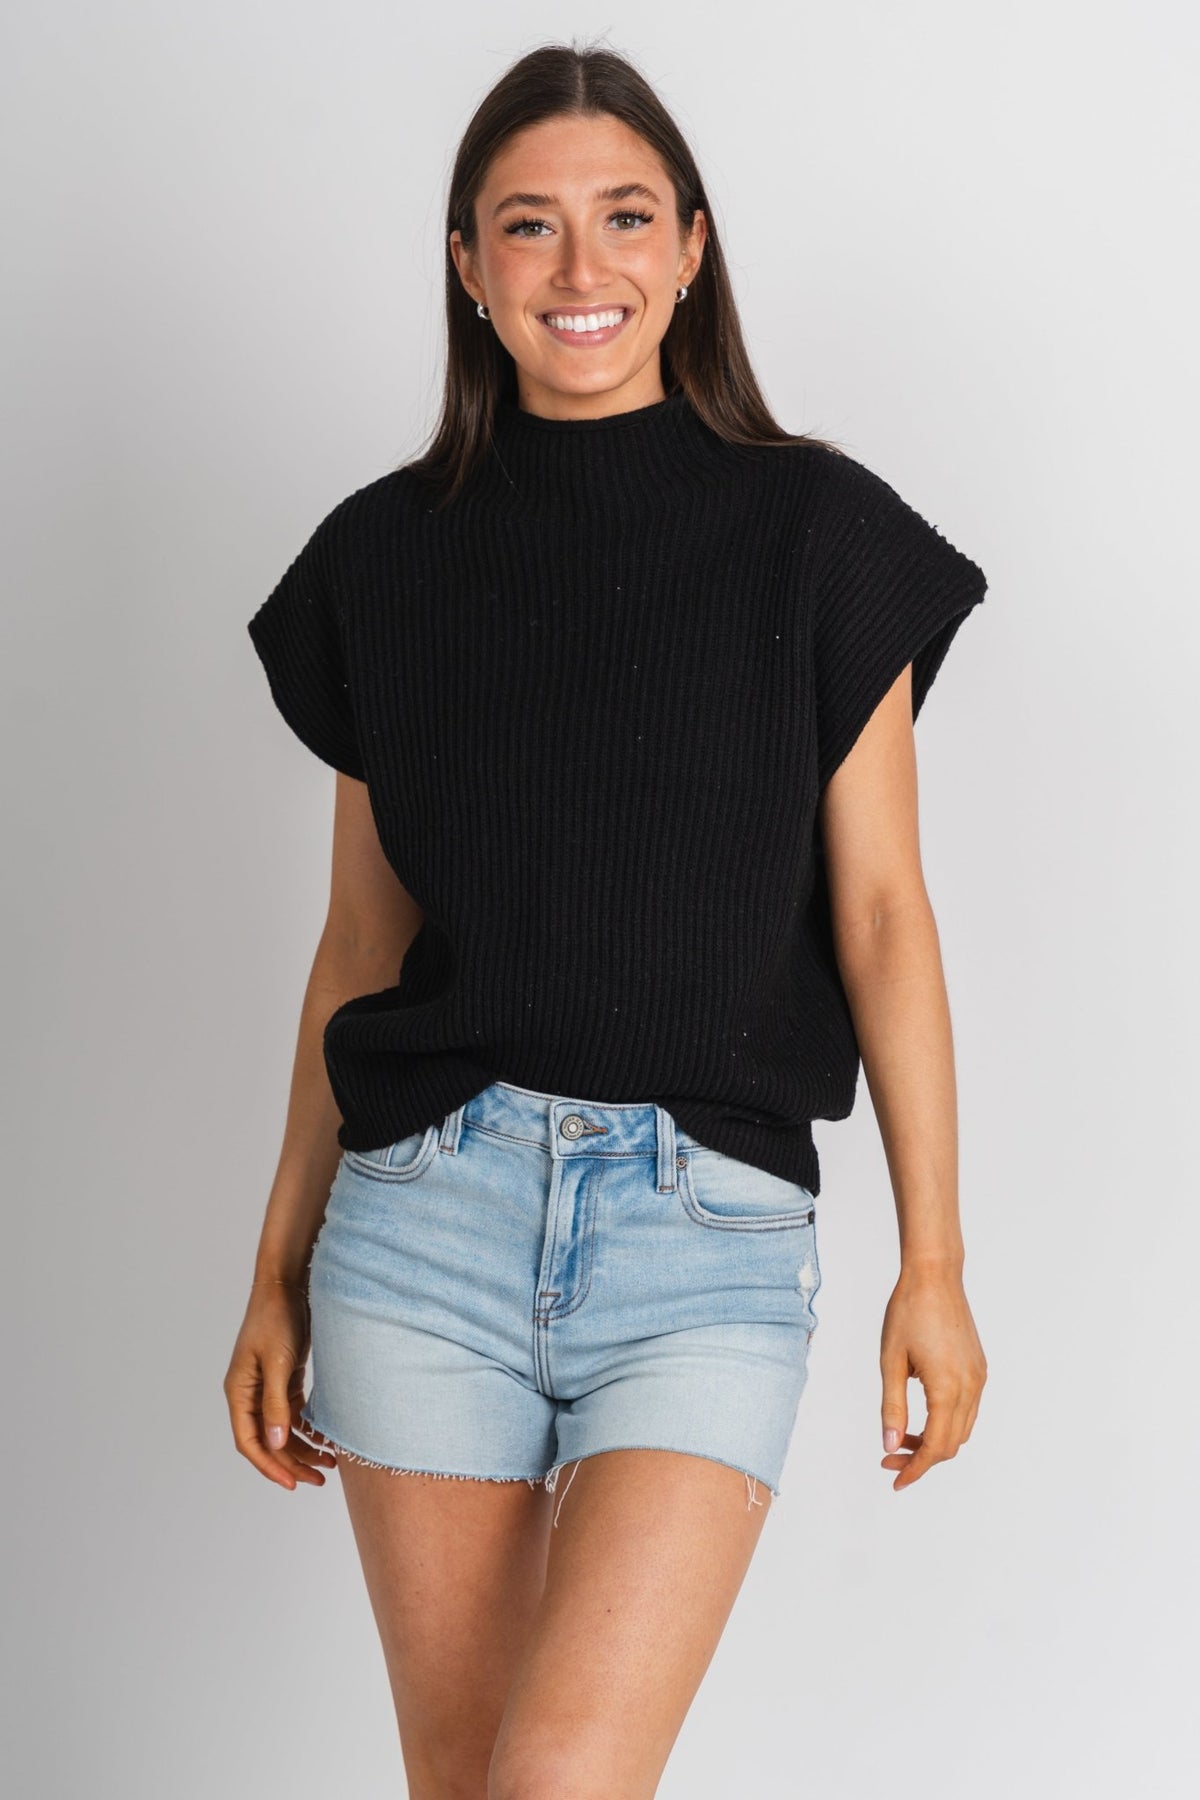 Turtle neck sweater vest top black – Boutique Sweaters | Fashionable Sweaters at Lush Fashion Lounge Boutique in Oklahoma City